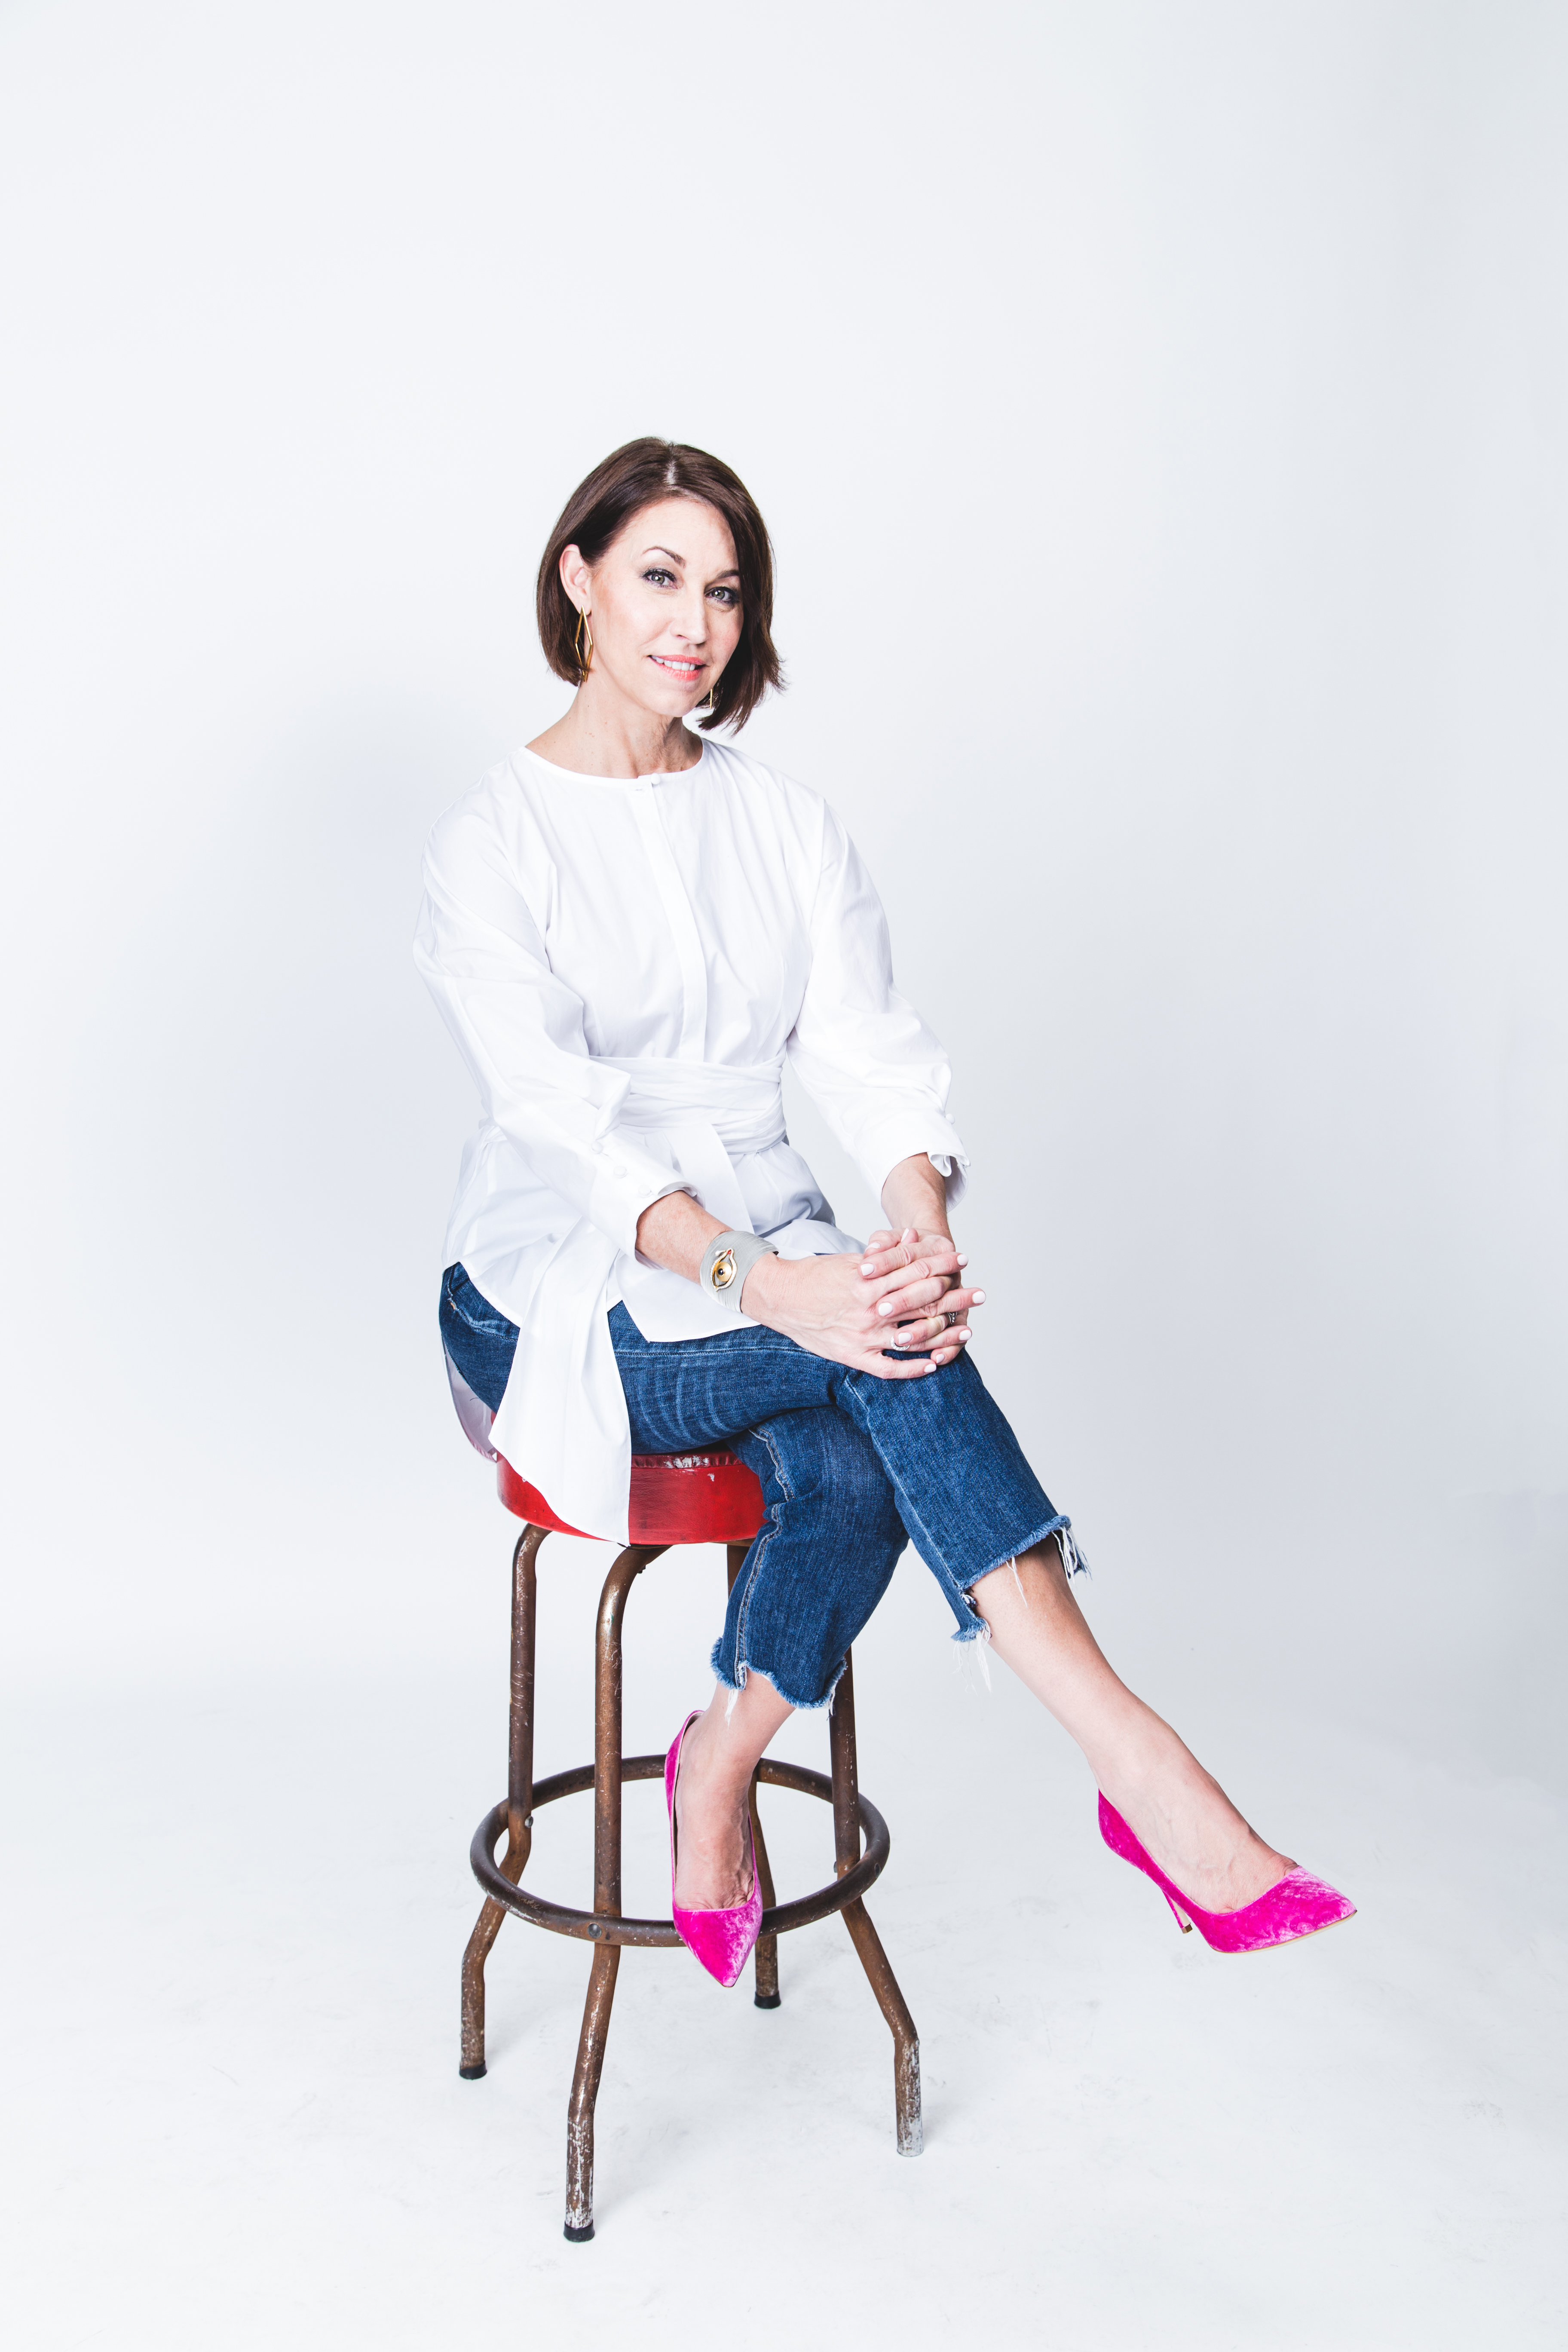 Woman wearing a white cotton top, jeans and pink shoes sitting on a stool